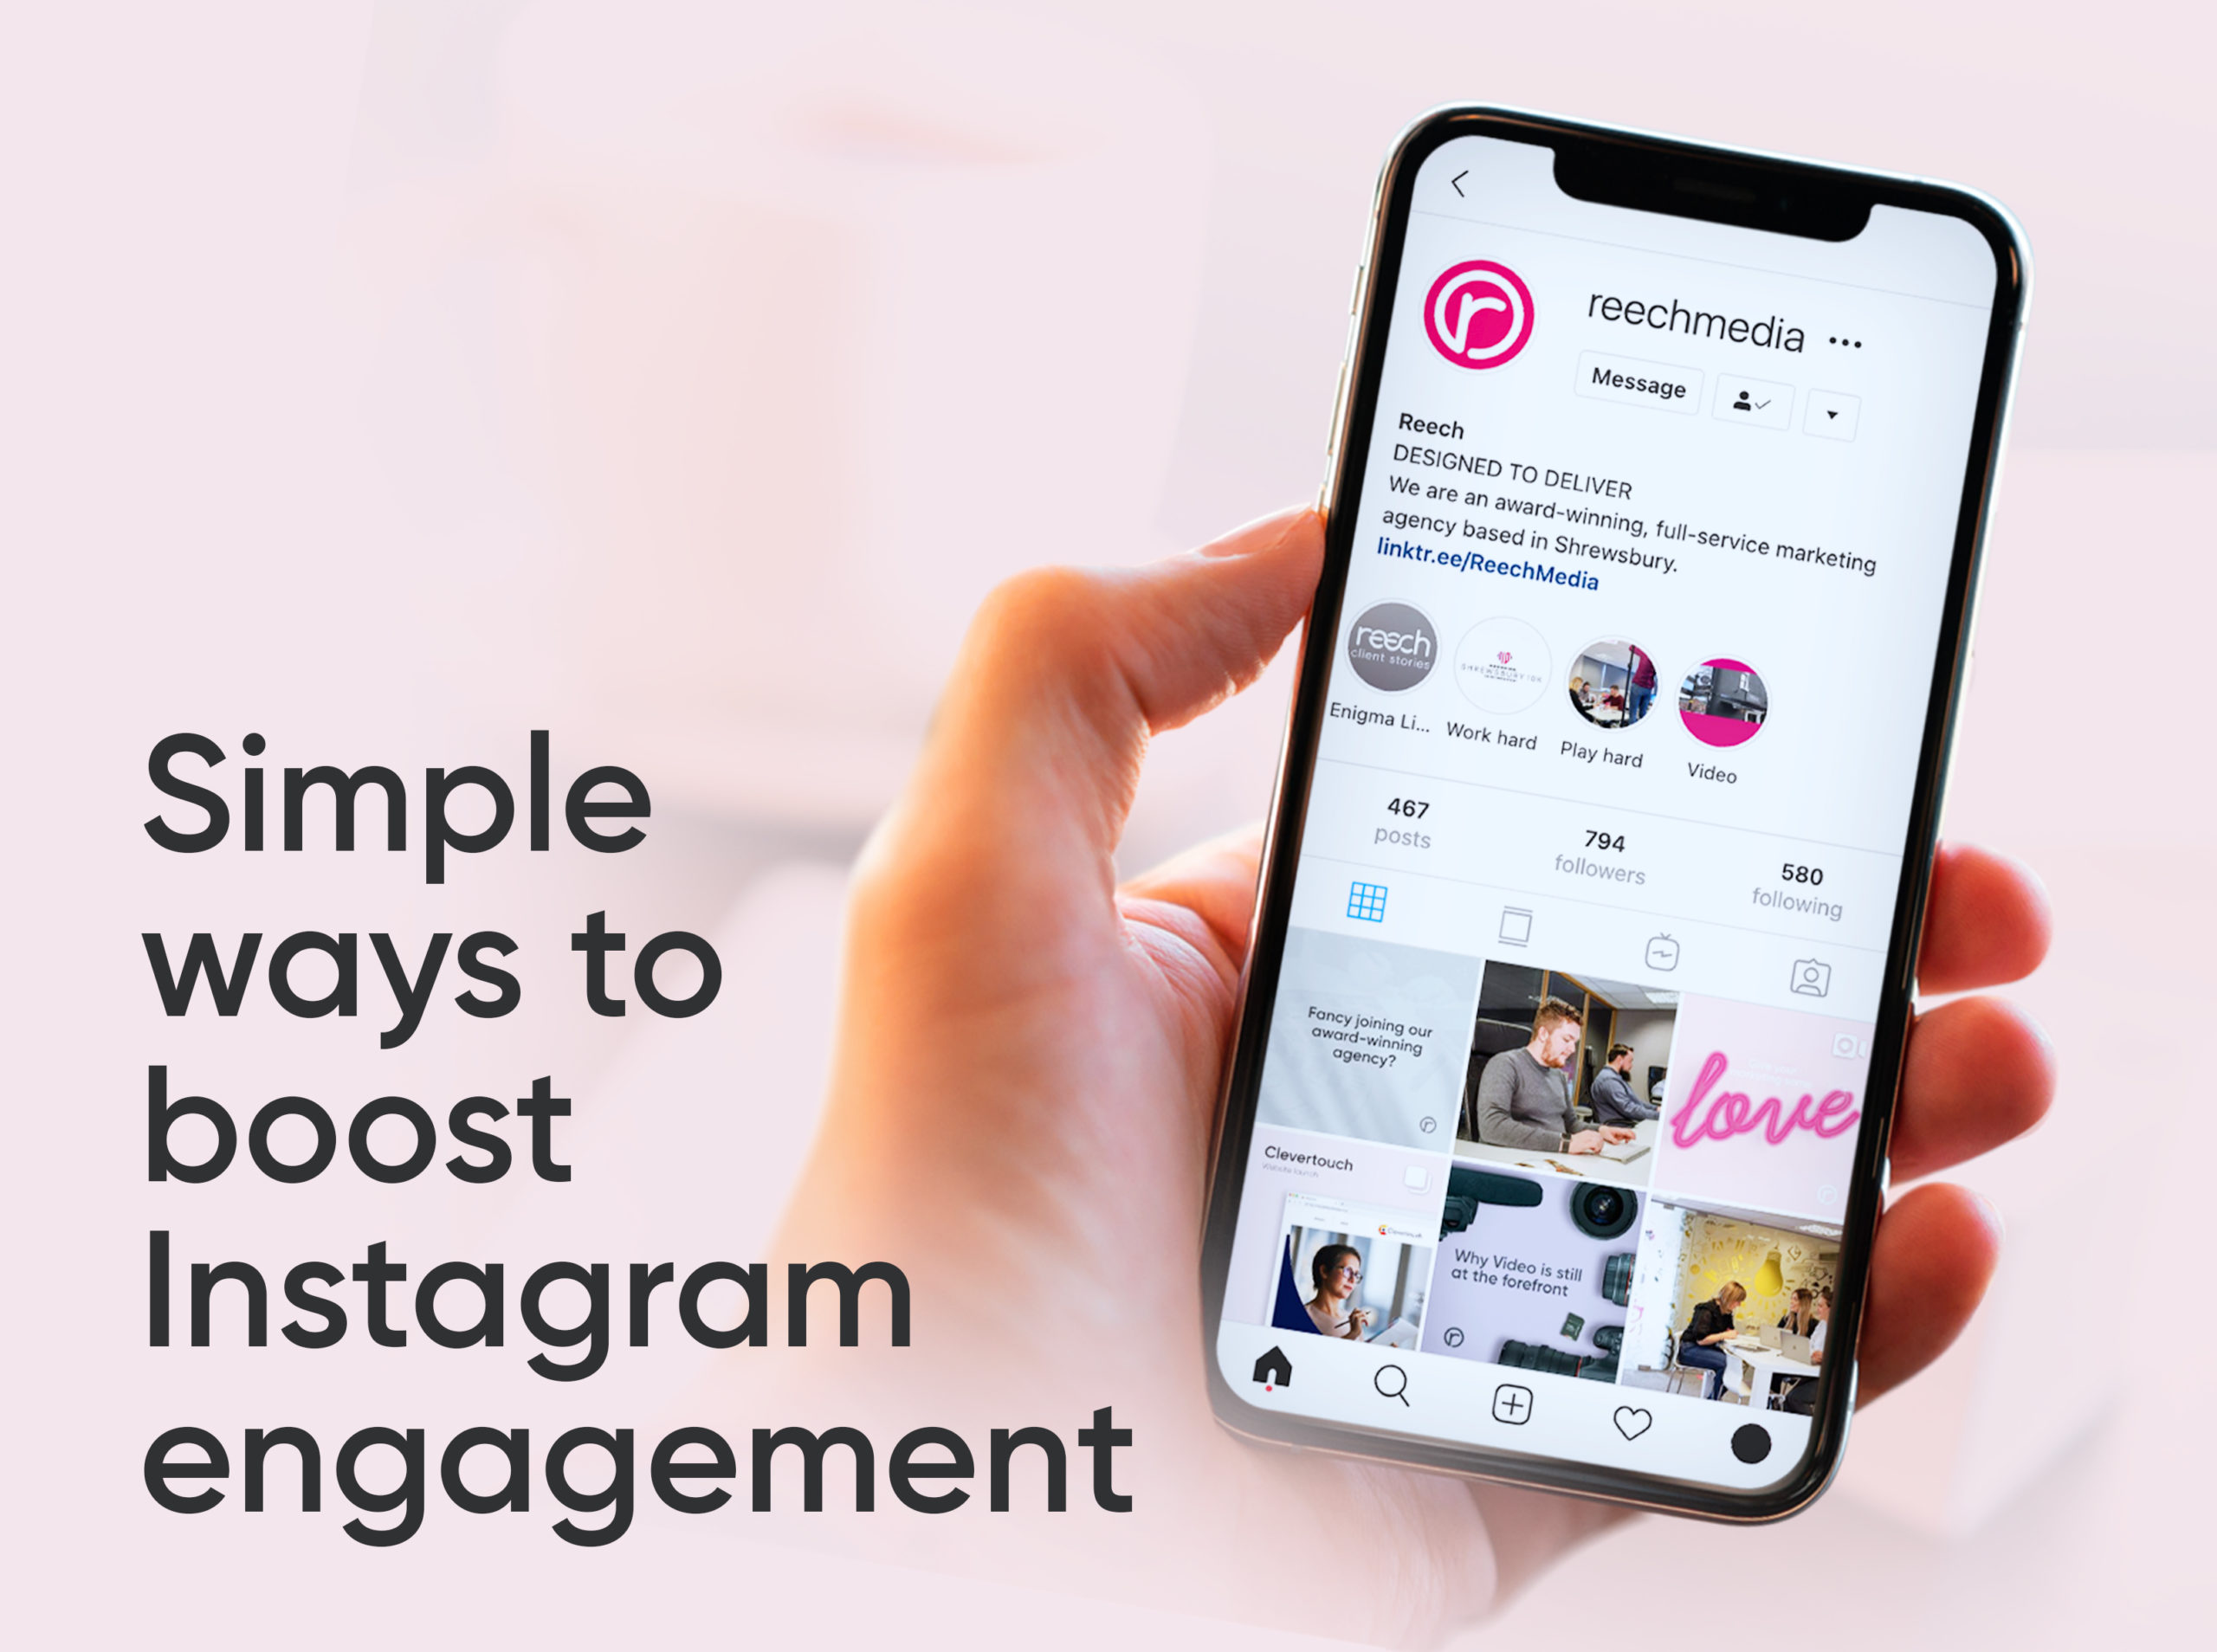 Simple ways to boost Instagram engagement